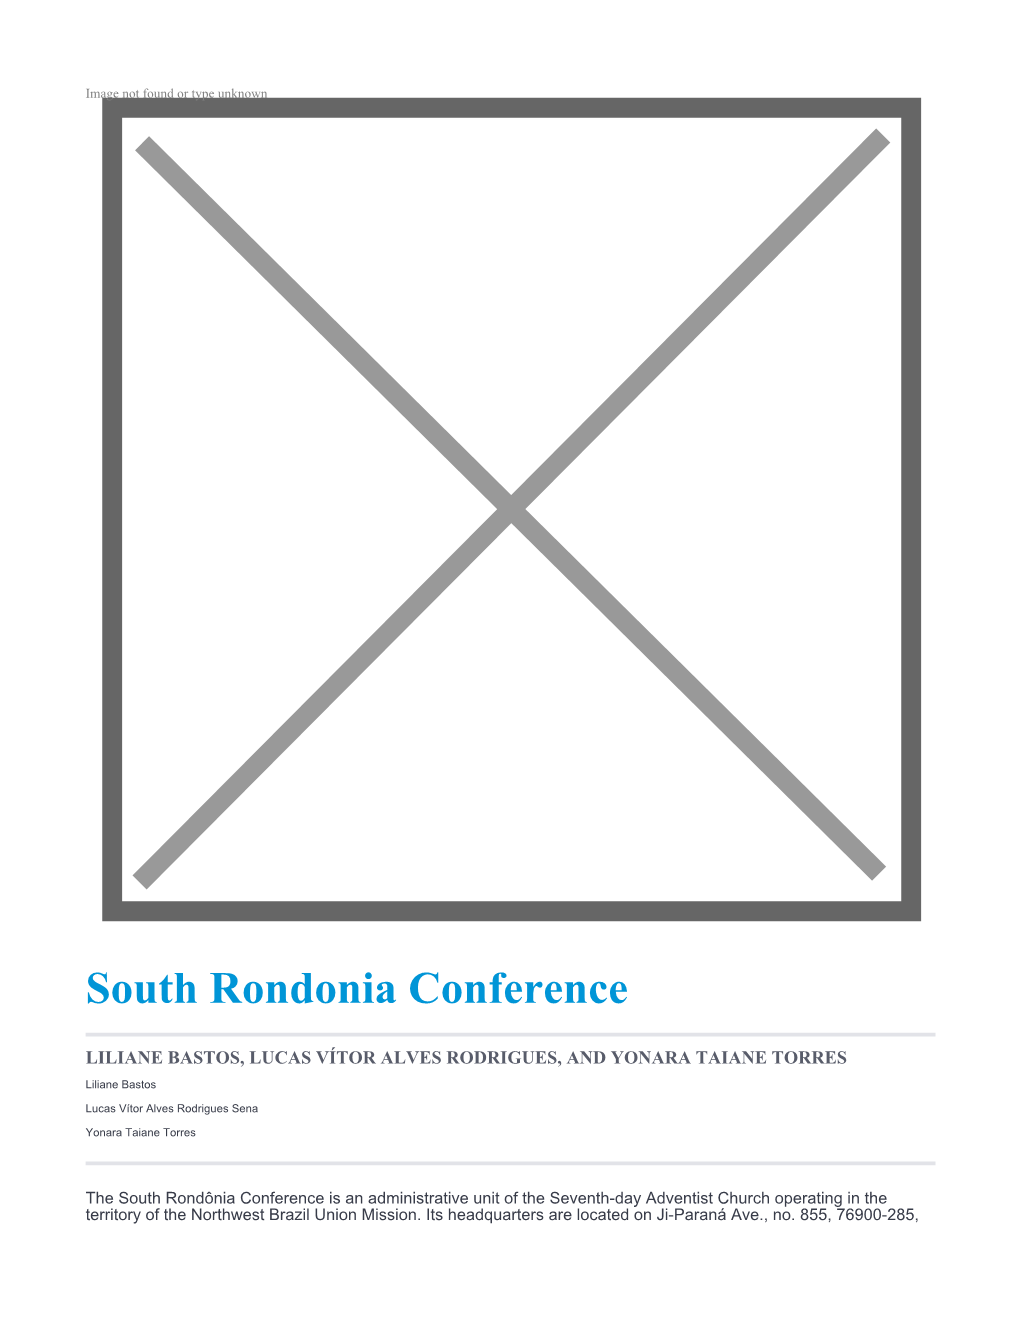 South Rondonia Conference